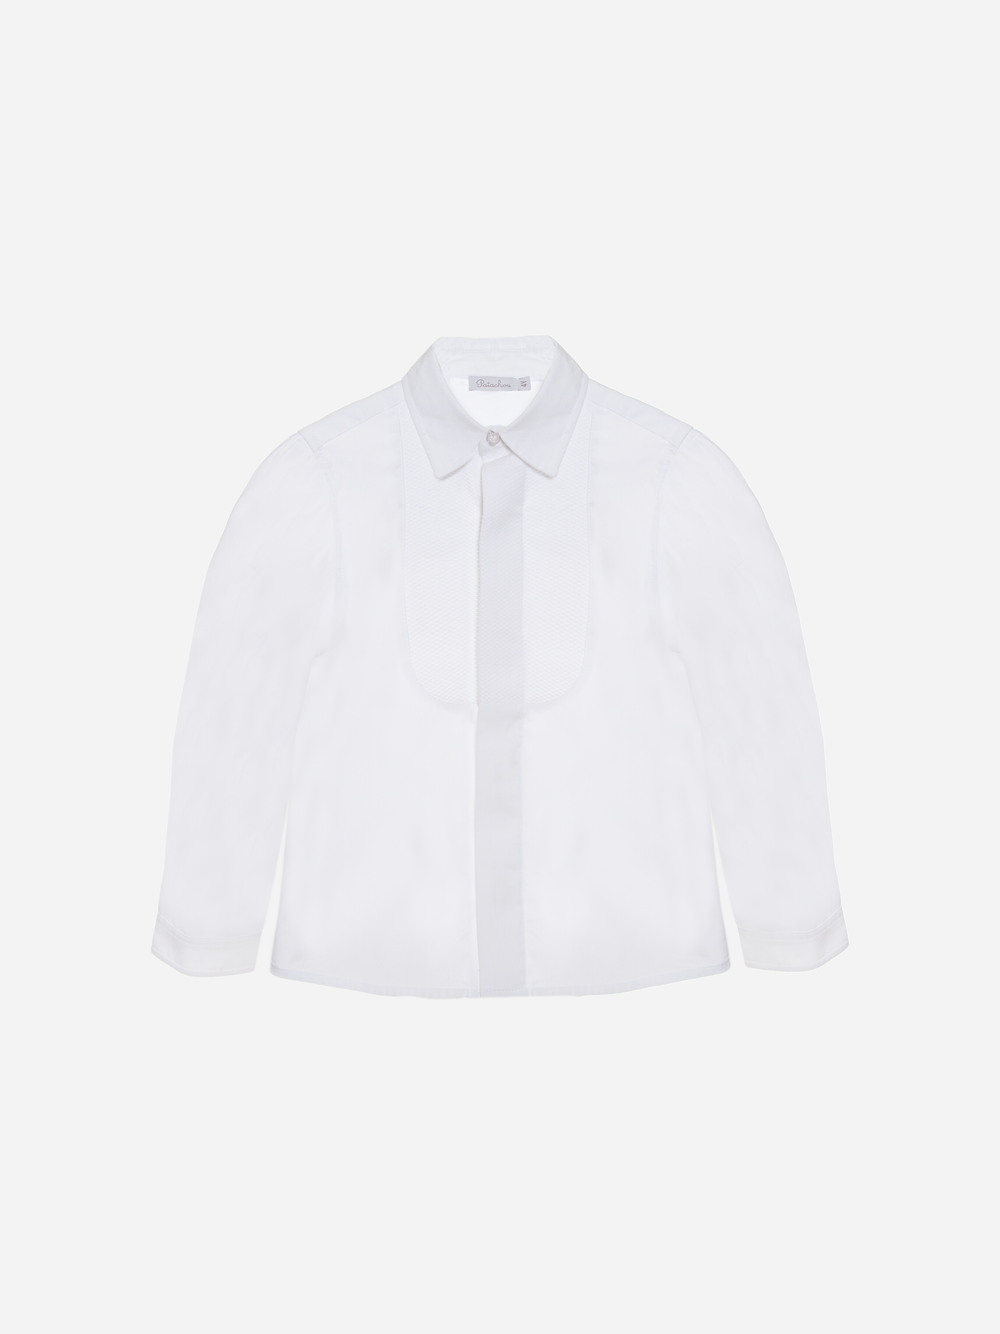 White poplin and piquet party shirt